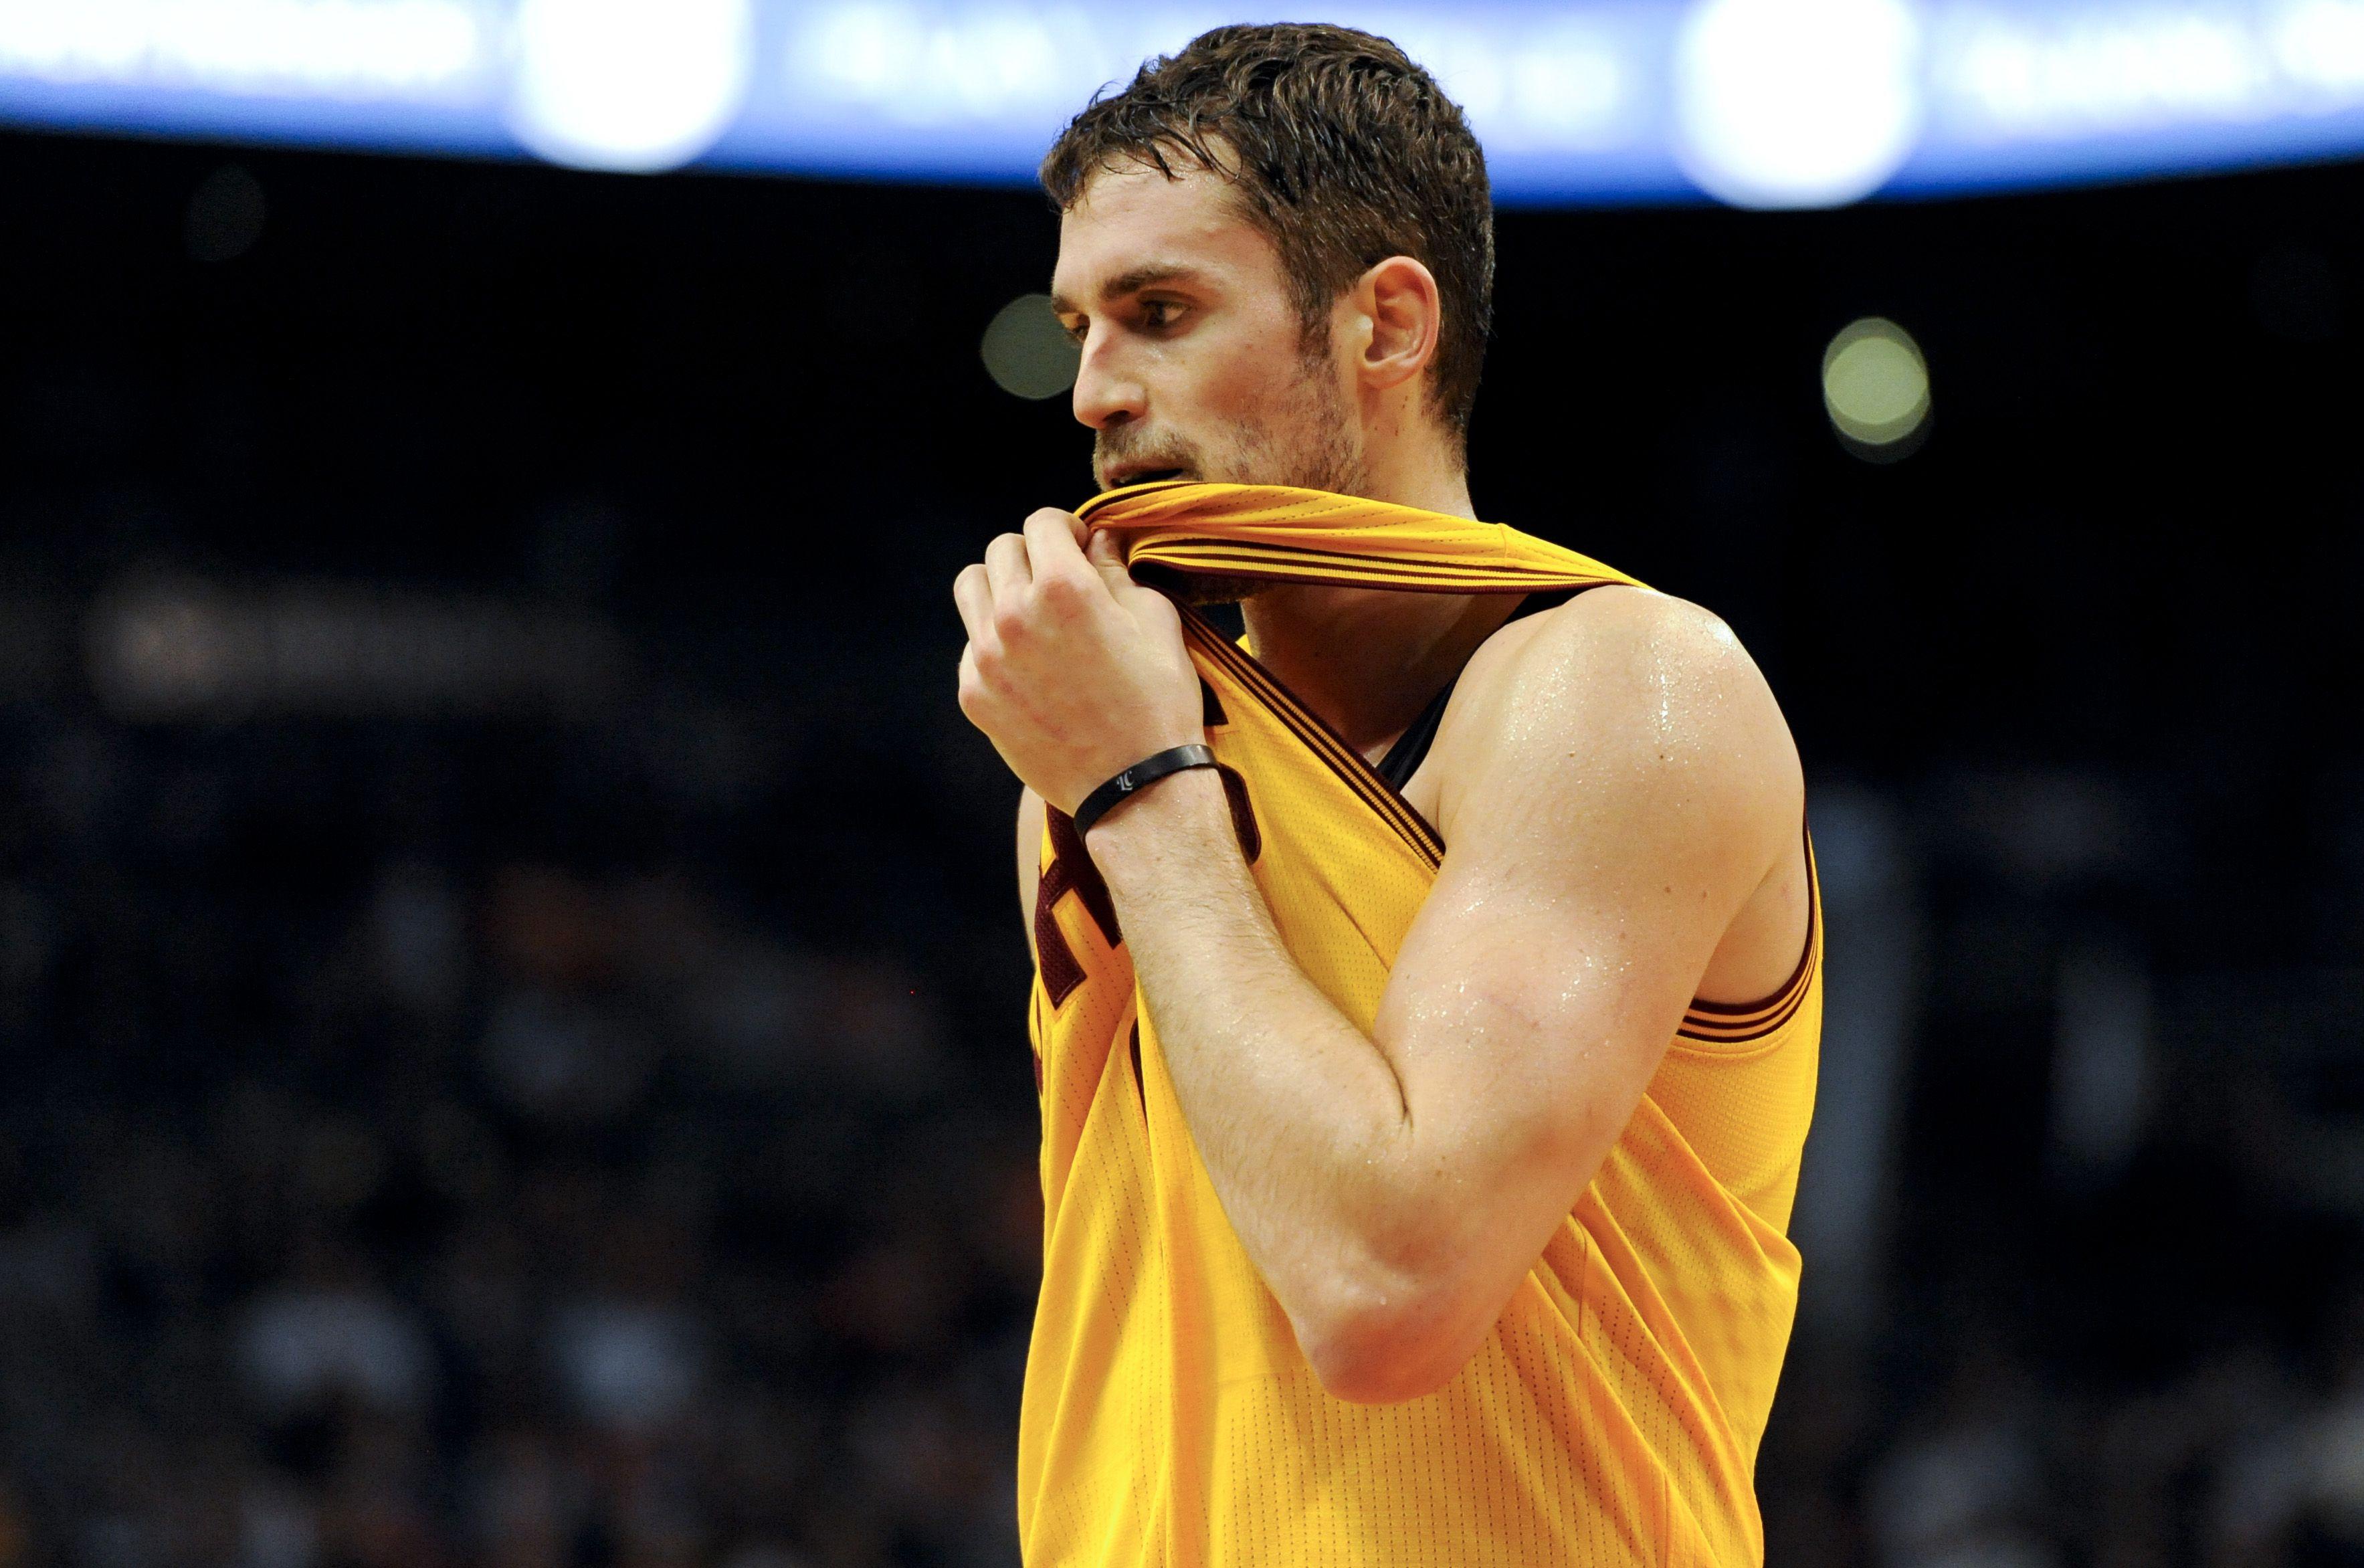 Download Kevin Love 2015 Wallpaper clrf hdxwallpaperz.com